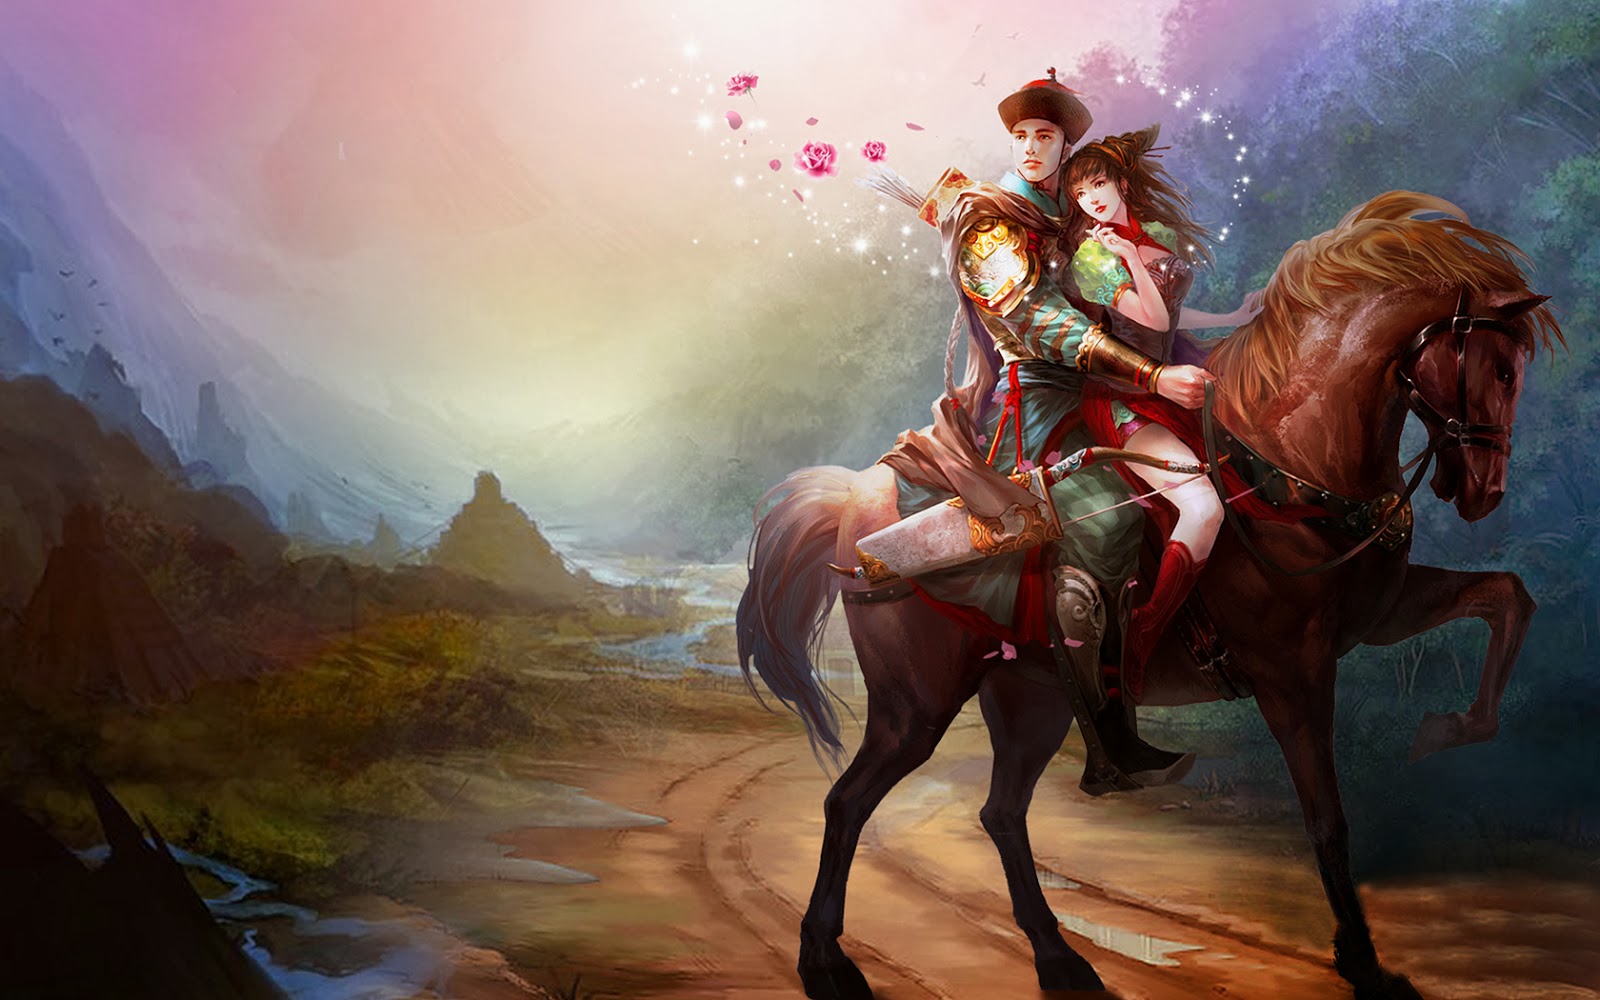 Asian-lovers-riding-horse-romantic-paintings-wallpapers.jpg